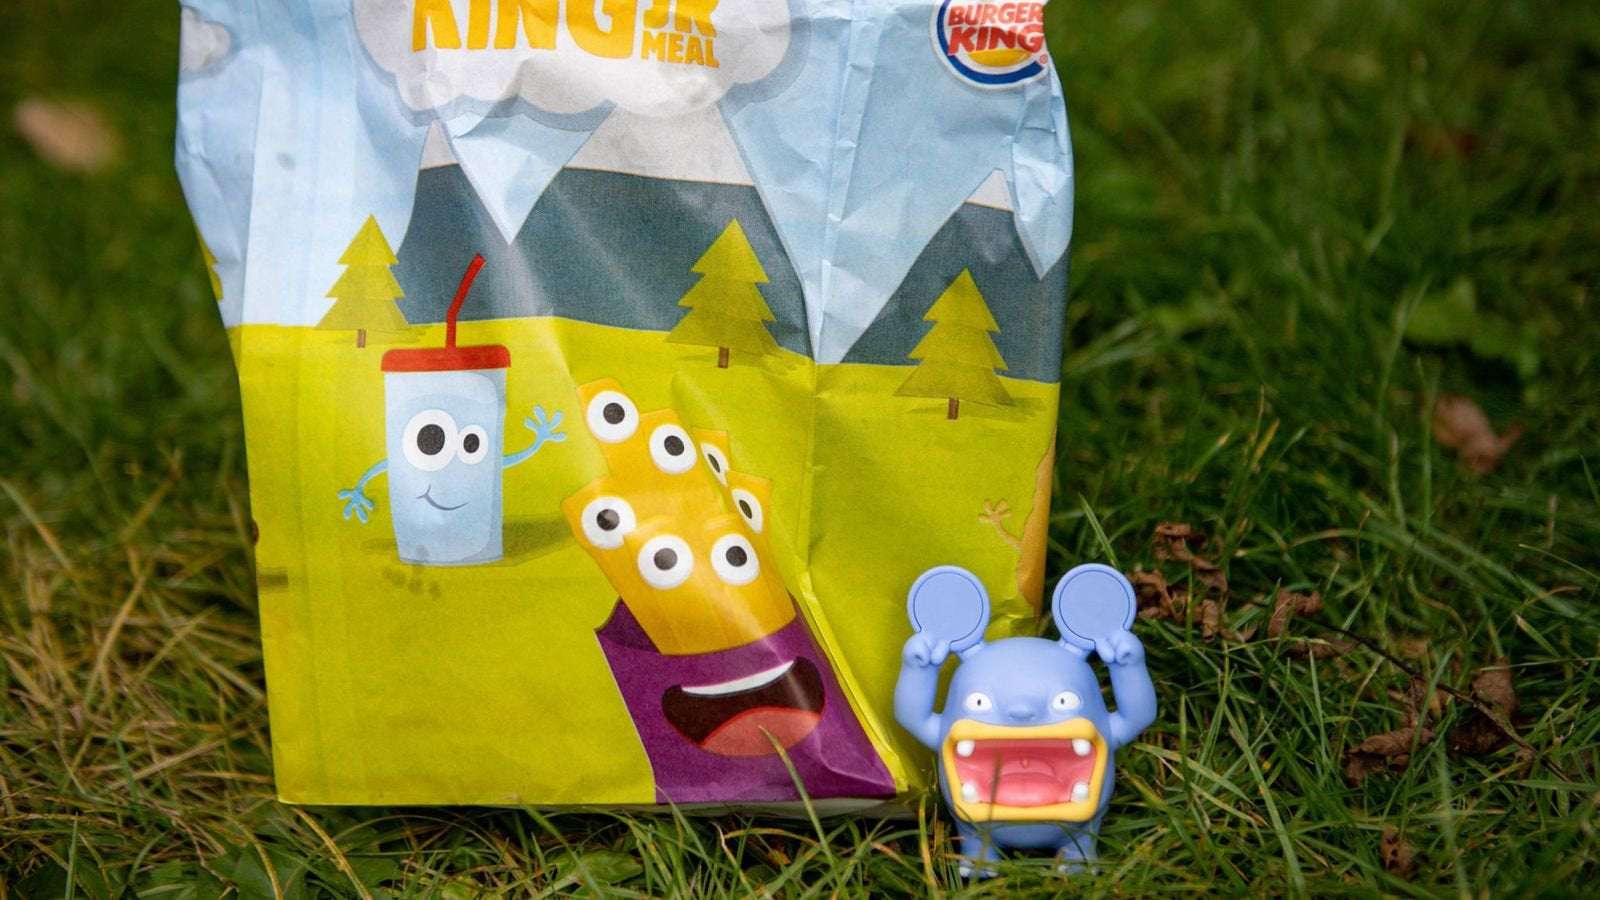 image for Burger King removes all plastic toys from kids meals